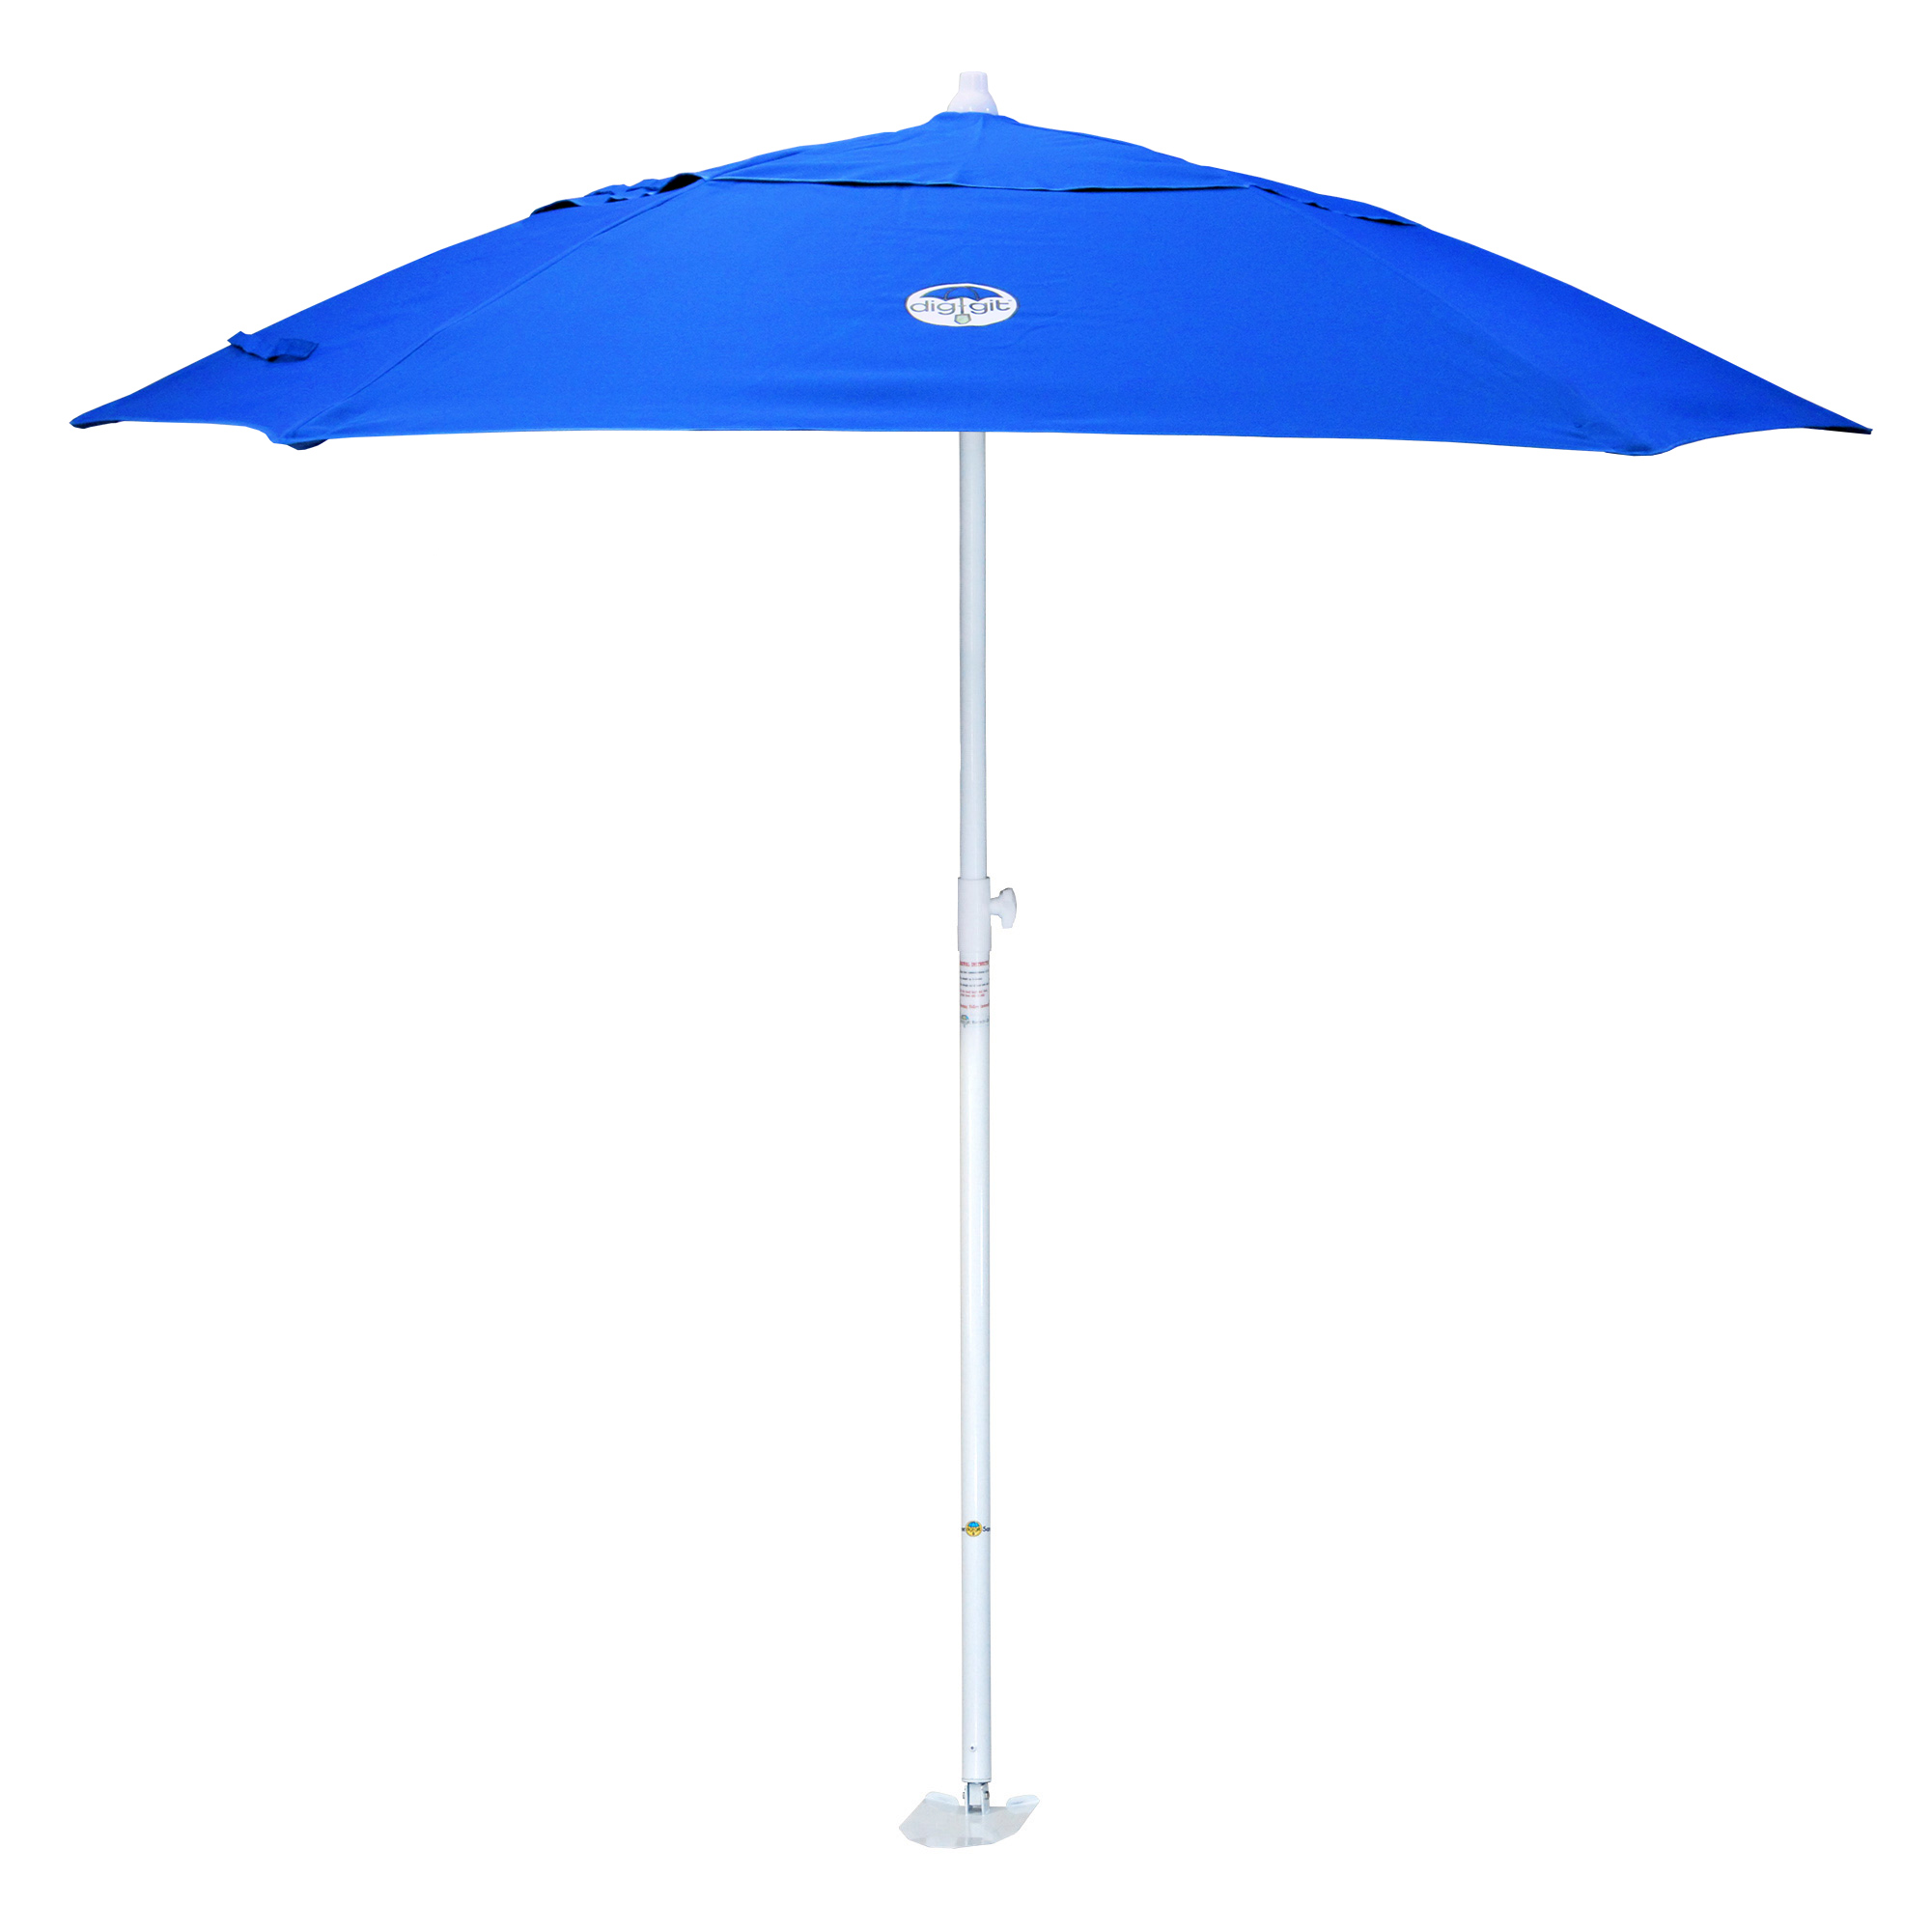 dig-git Beach Umbrella wind resistant, Royal blue vented with shovel sand anchor - image 1 of 6